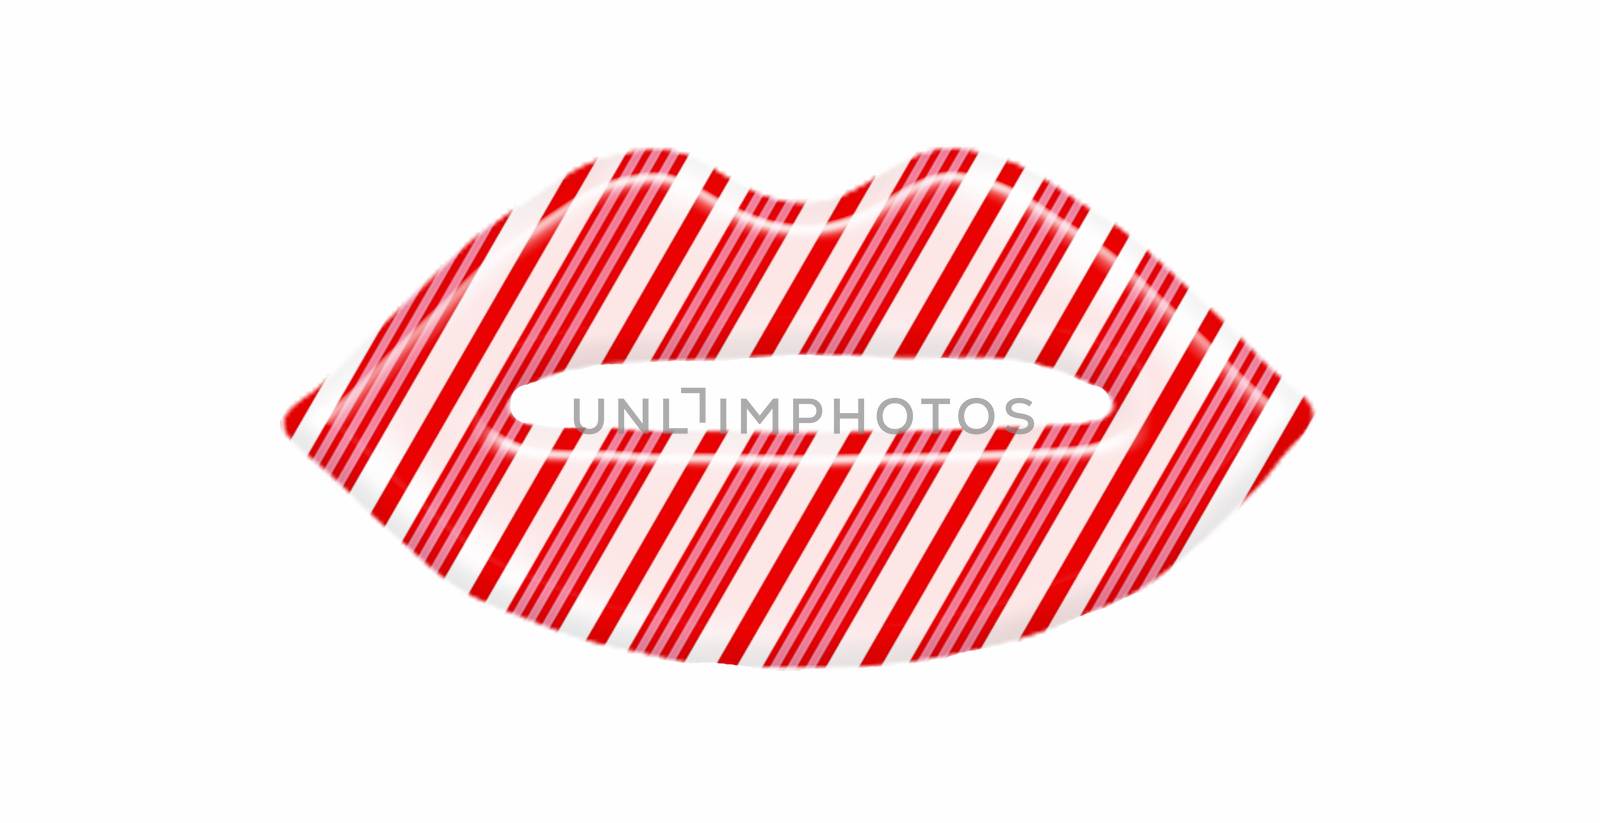 Candy cane lips you want to kiss by Havana